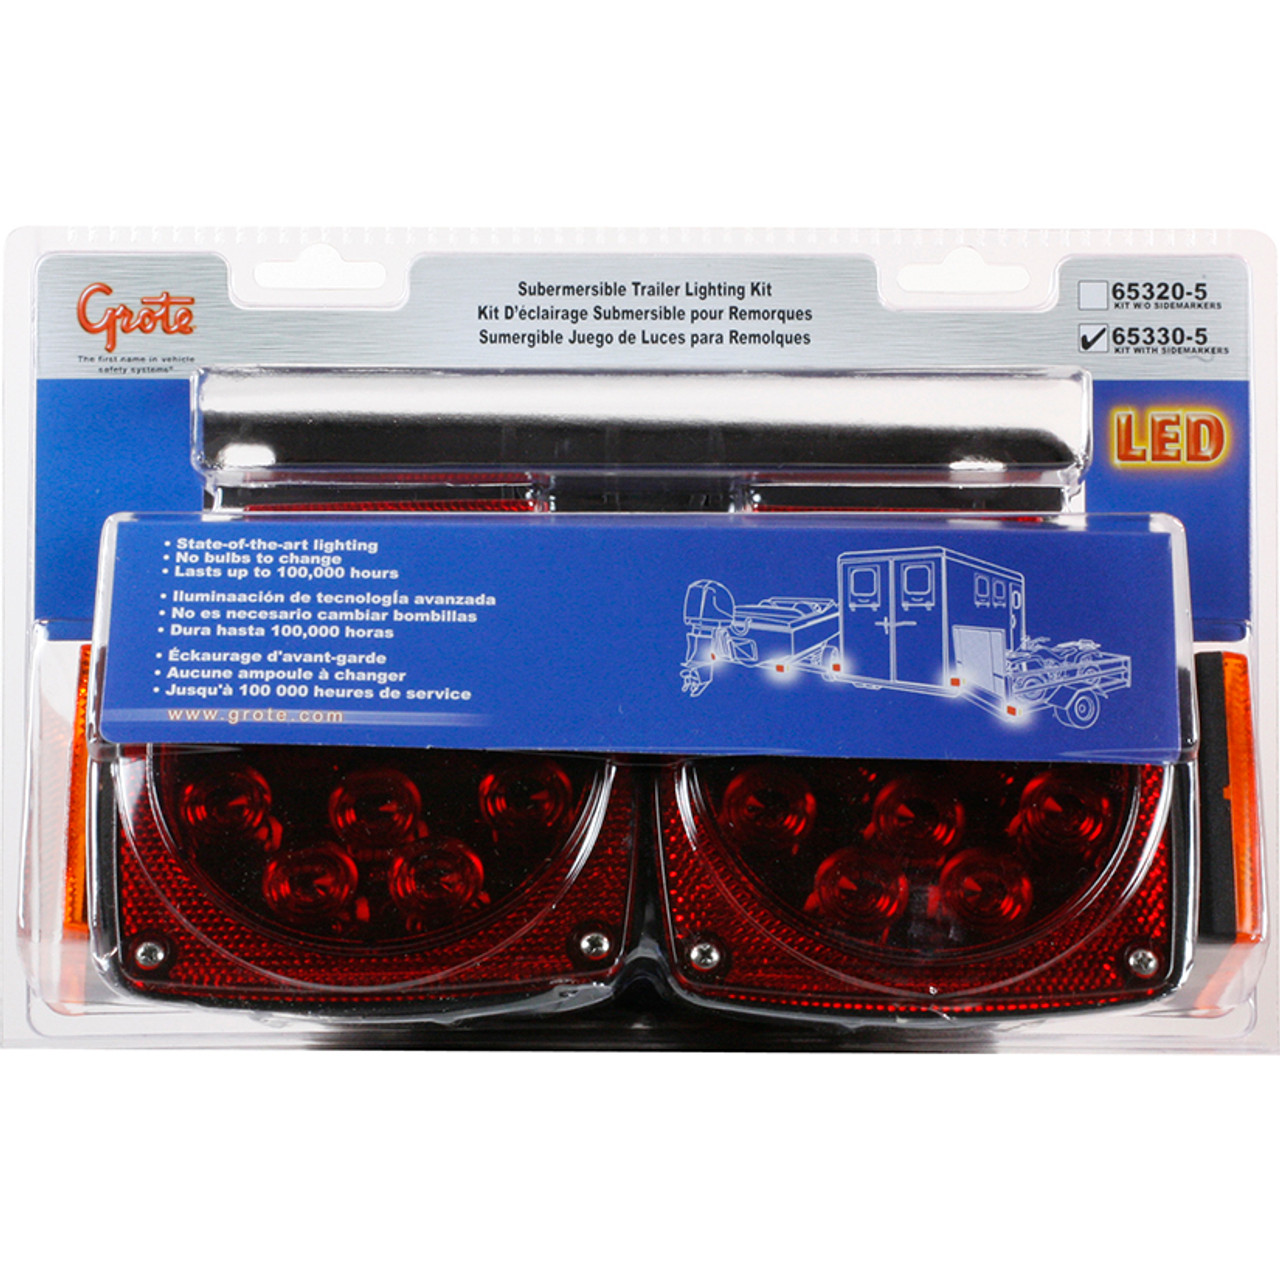 Submersible LED Trailer Lighting Kit - w/Clearance/Marker - Retail - Red  65330-5